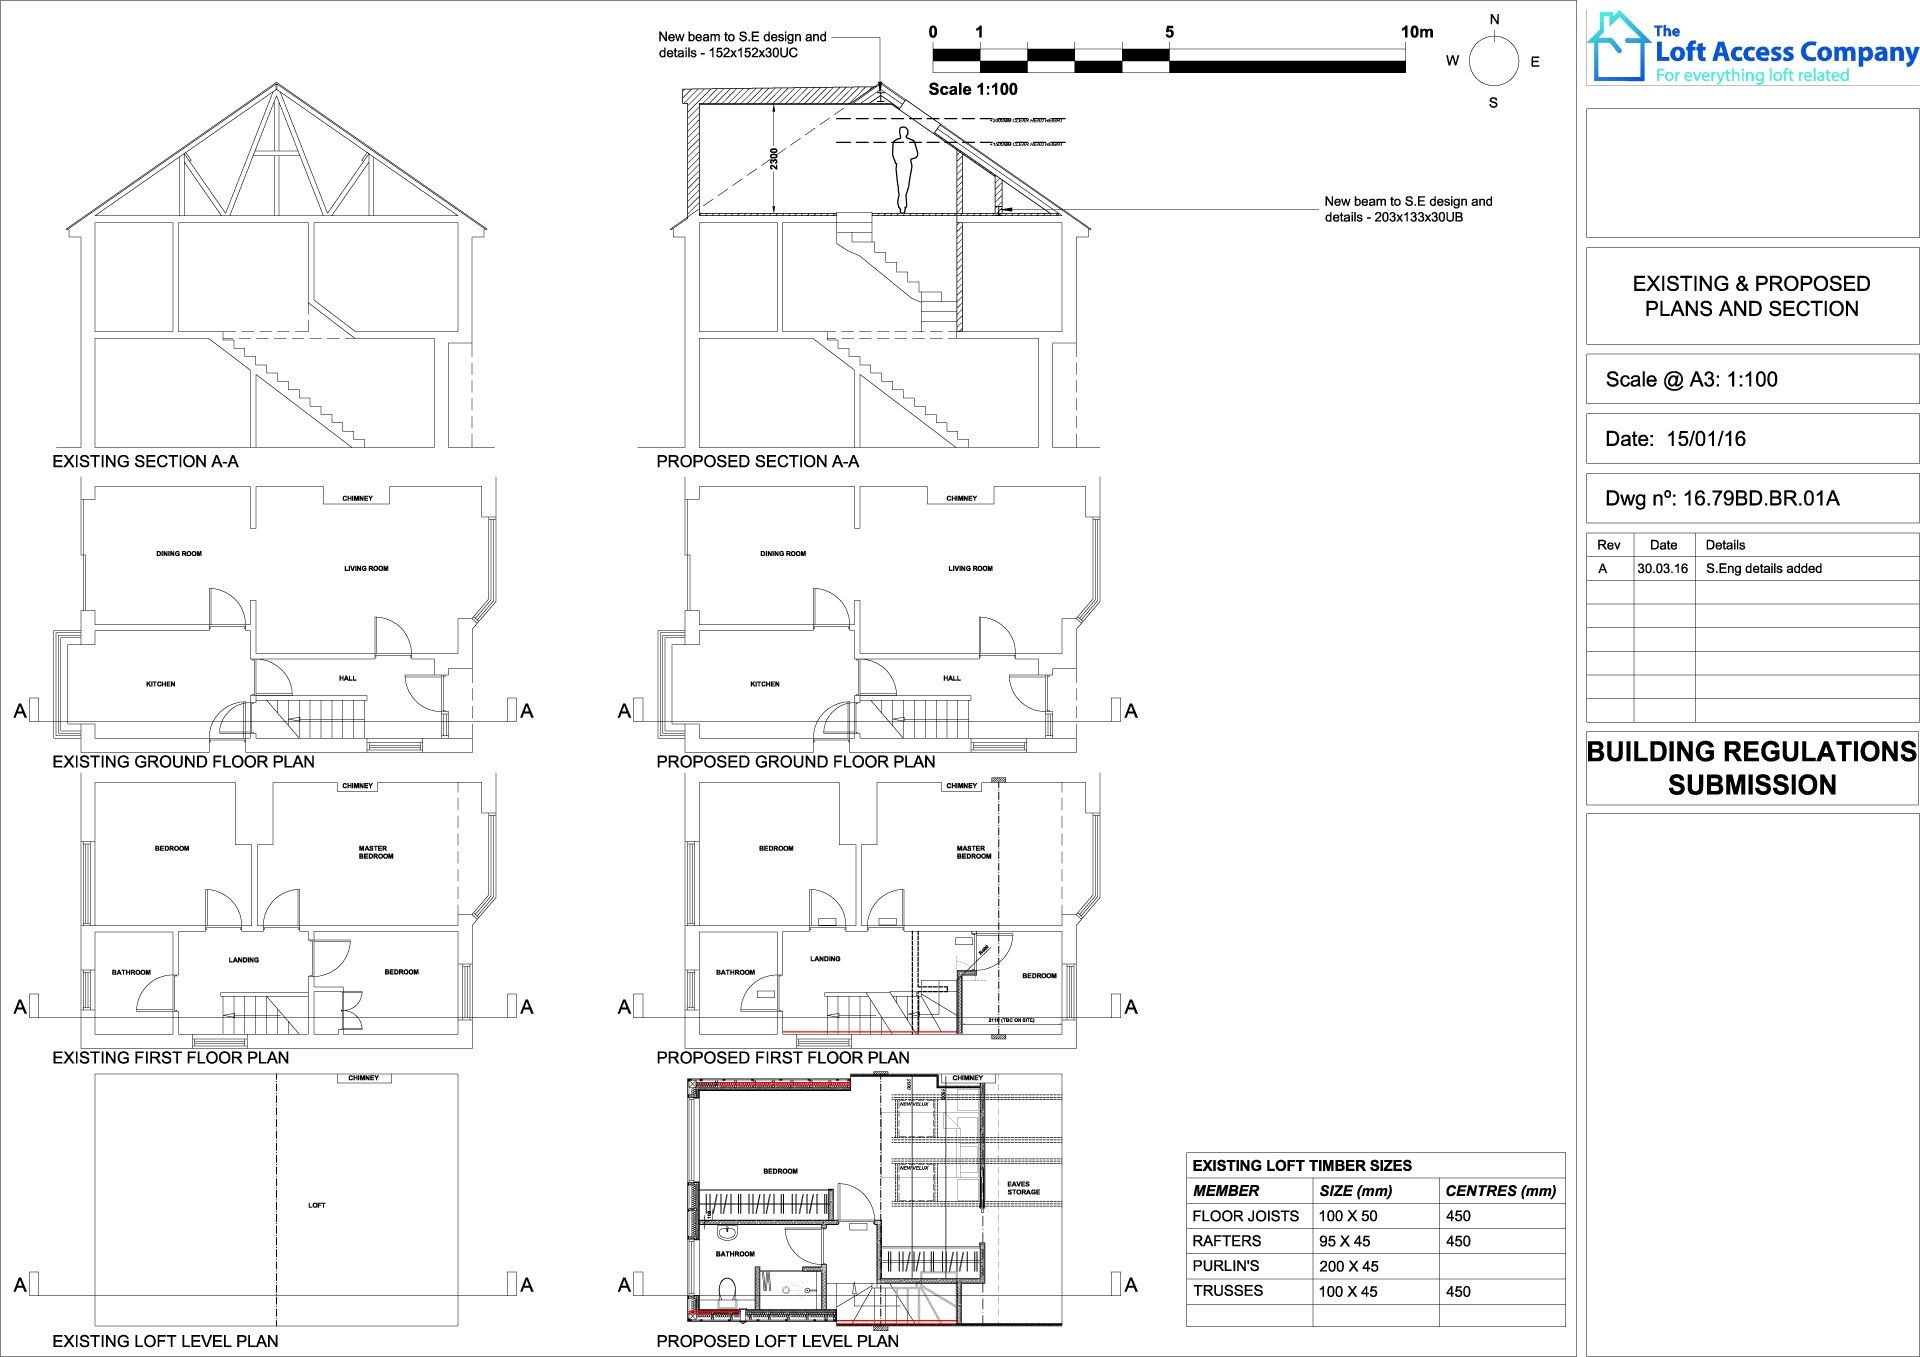 architectural drawings for loft conversion